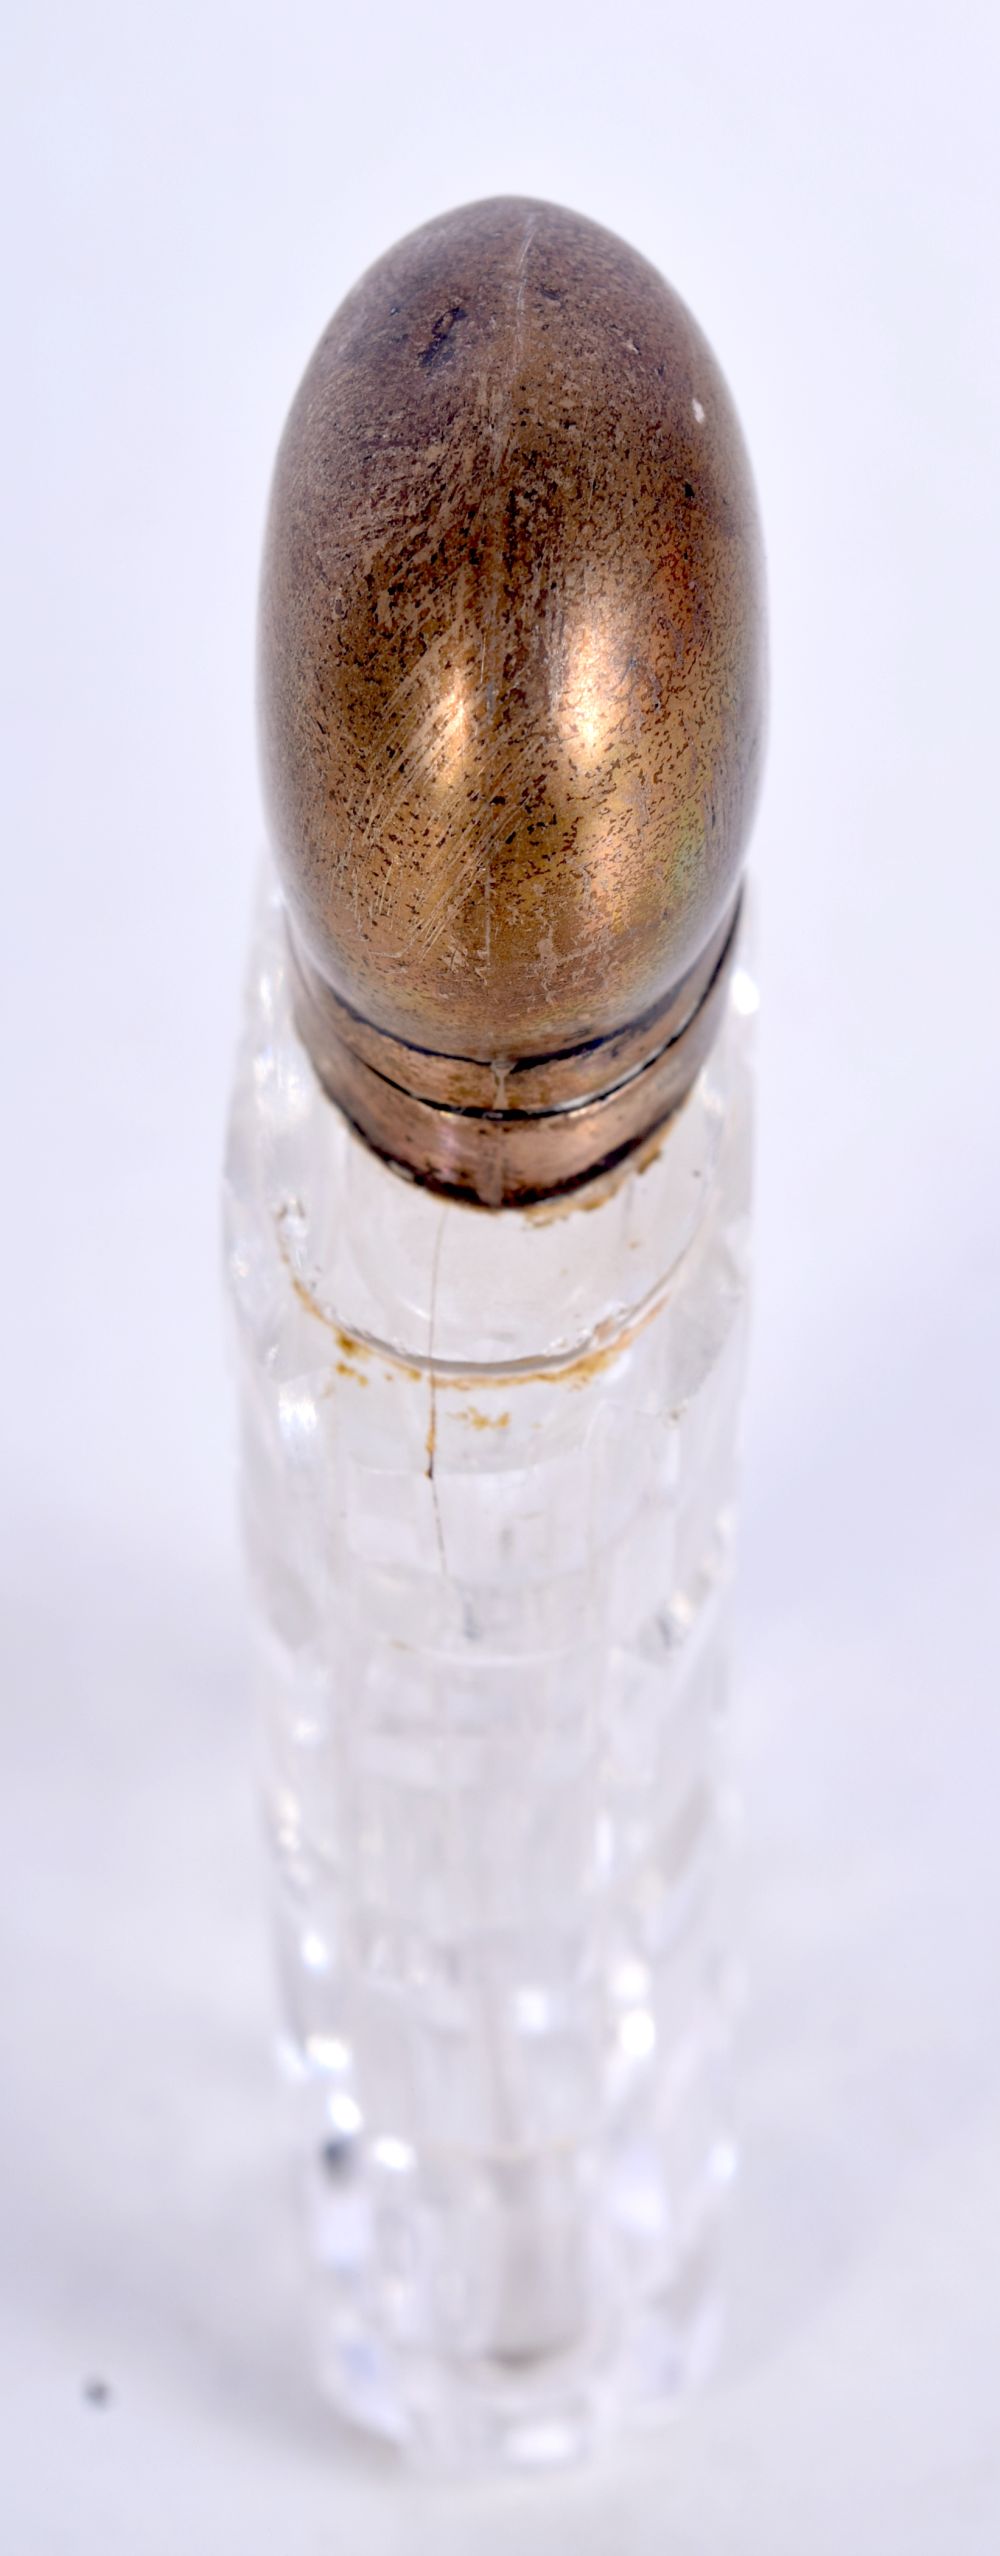 A SCENT BOTTLE. 7.9cm x 3.6cm x 1.6cm, weight 50.5g - Image 2 of 3